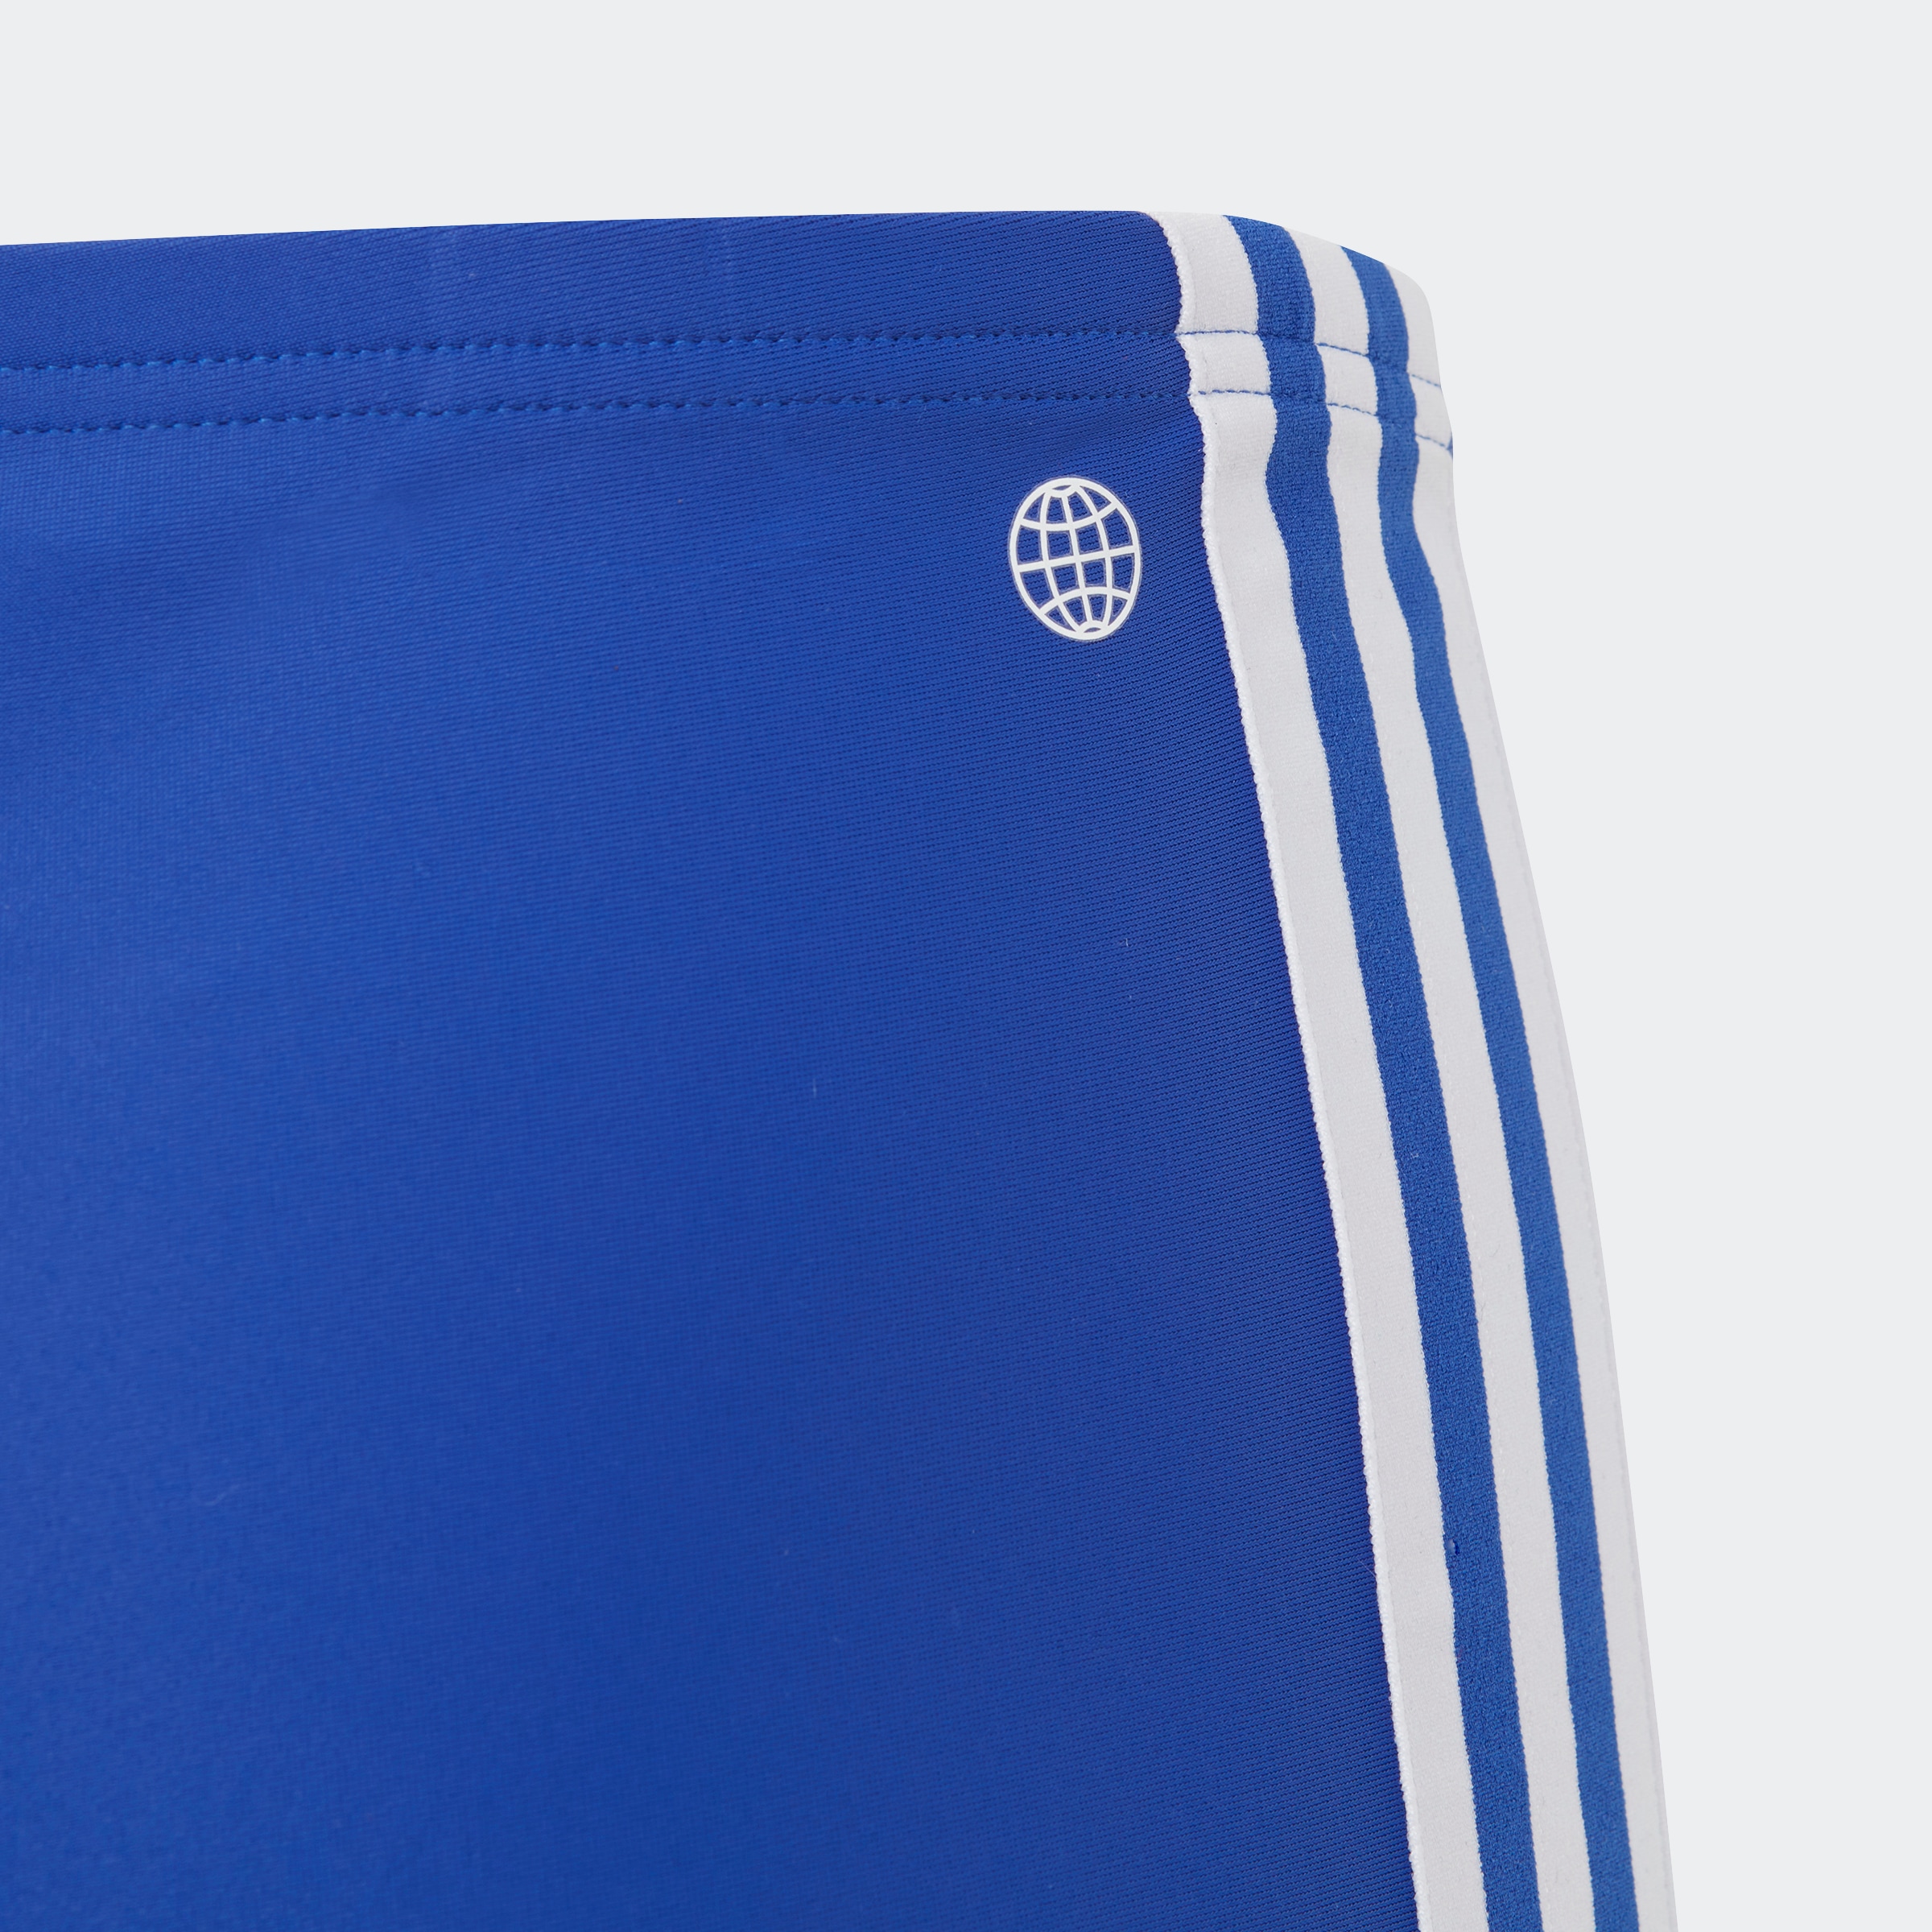 adidas Performance Badehose »3S bei BOXER«, (1 St.)